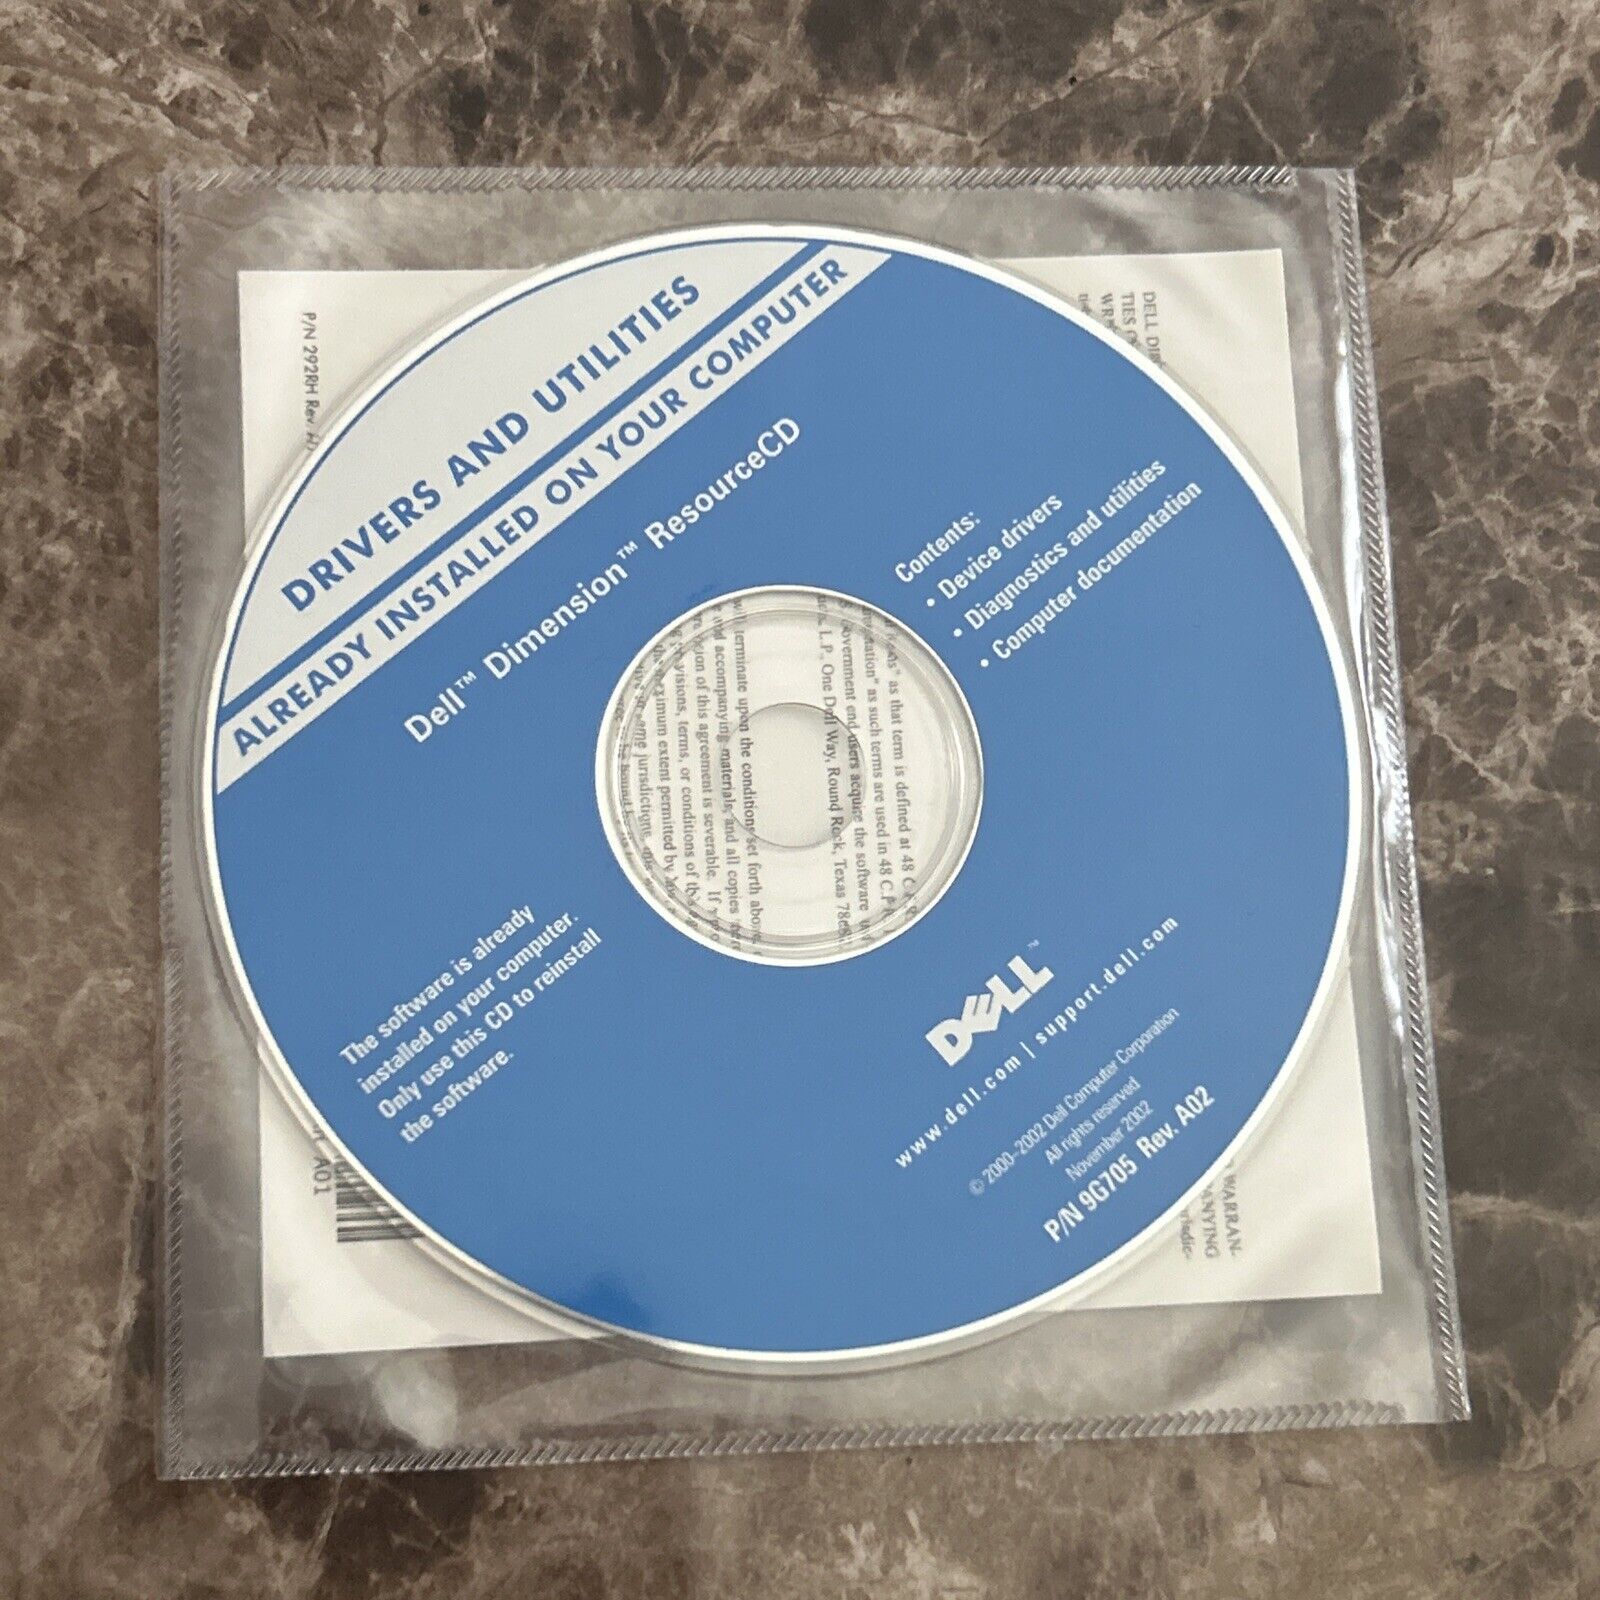 Dell Drivers and Utilities Dell Dimension Resource CD Brand New Sealed